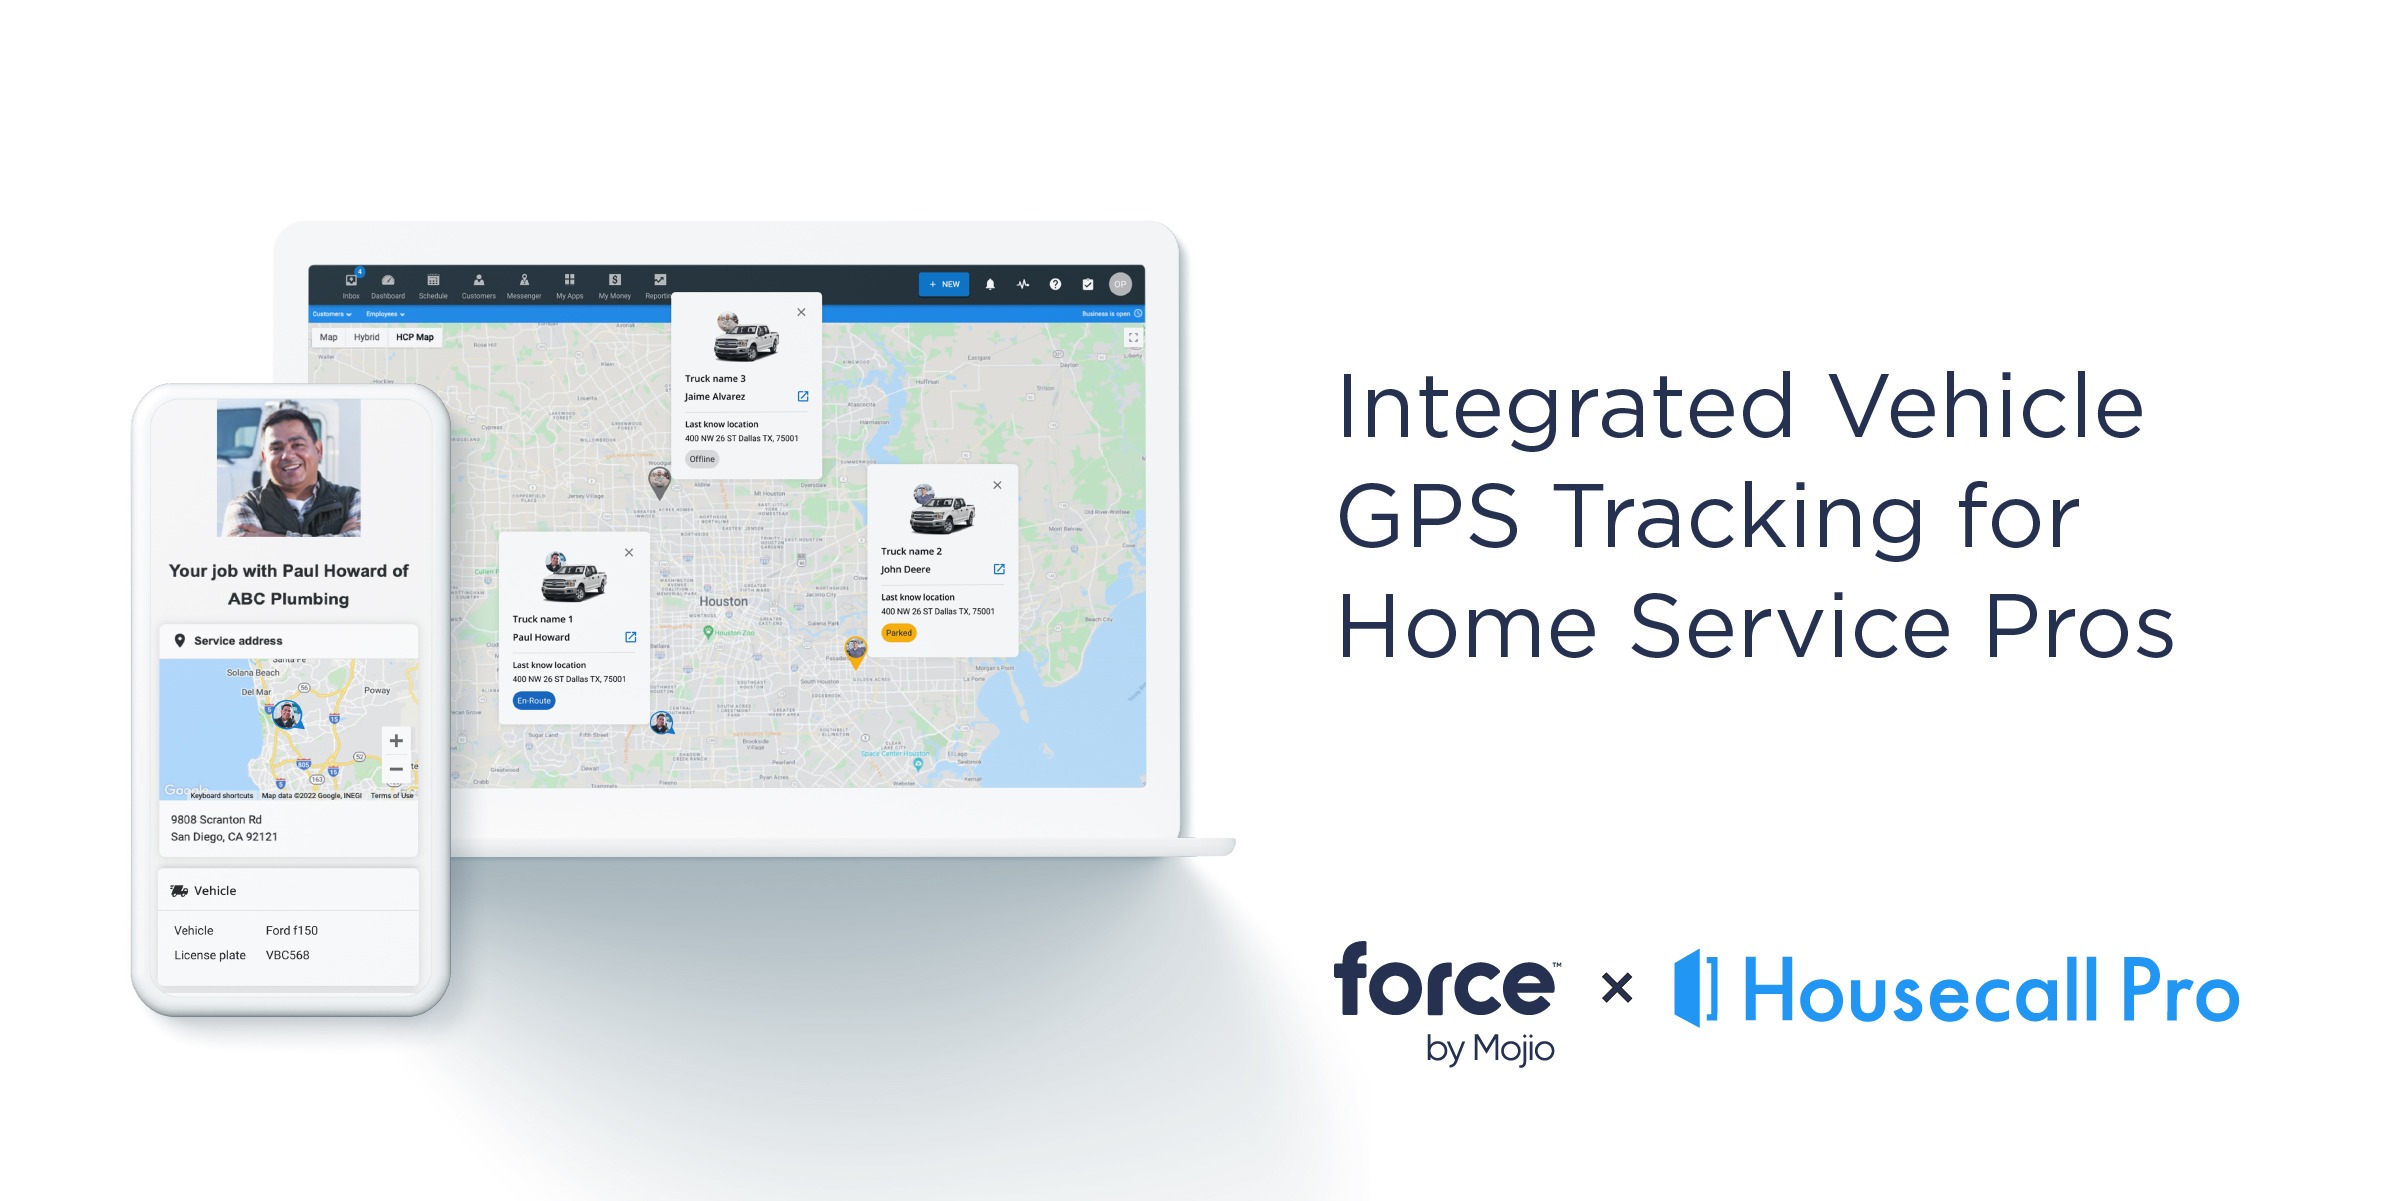 Home Services Business Management Software - Housecall Pro